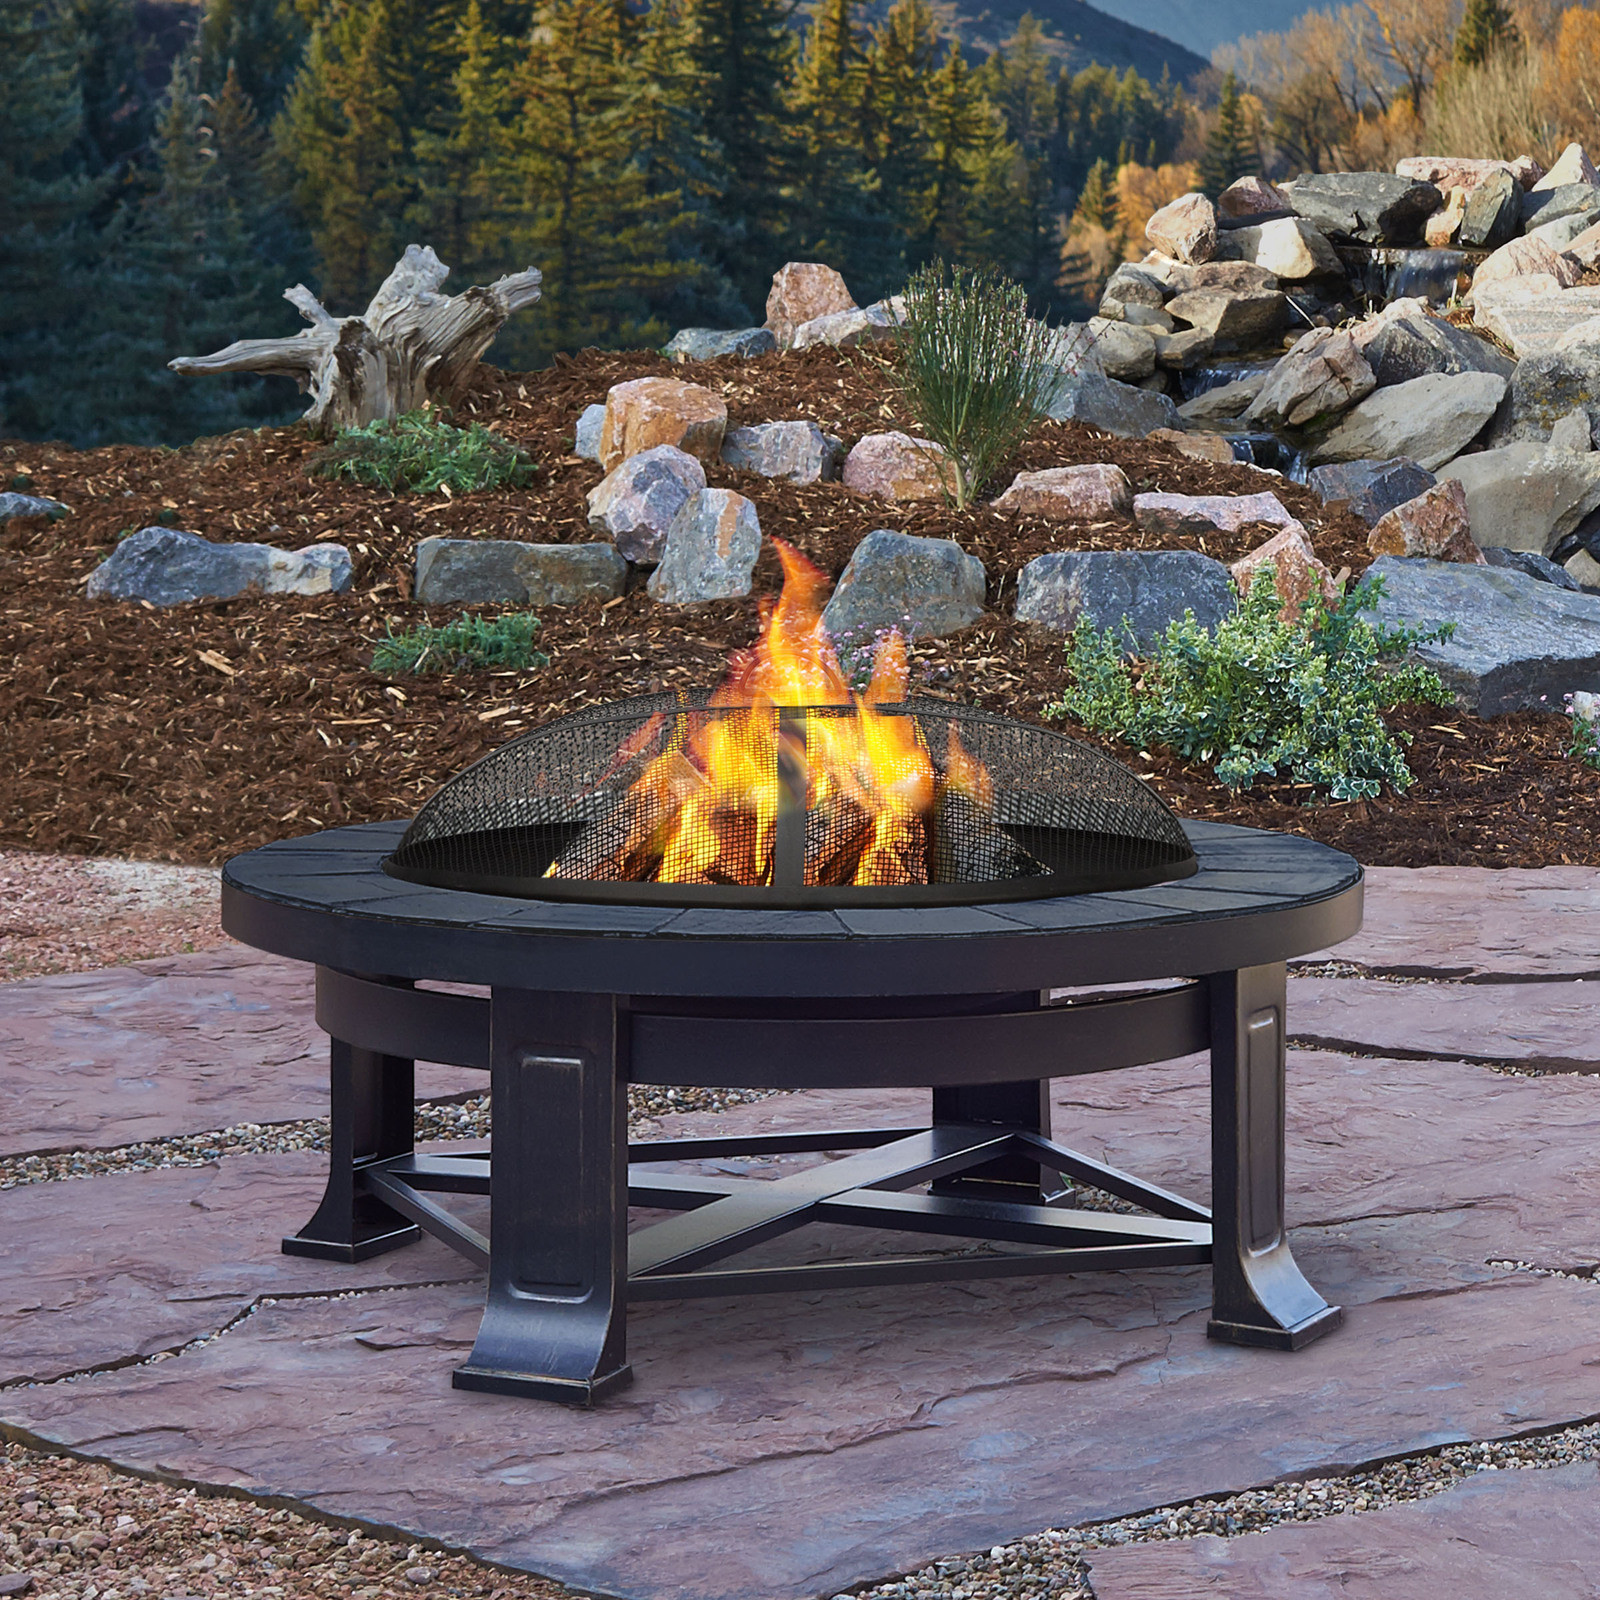 Patio Wood Fire Pit
 Real Flame Edwards 33 75" Outdoor Patio Deck Wood Burning